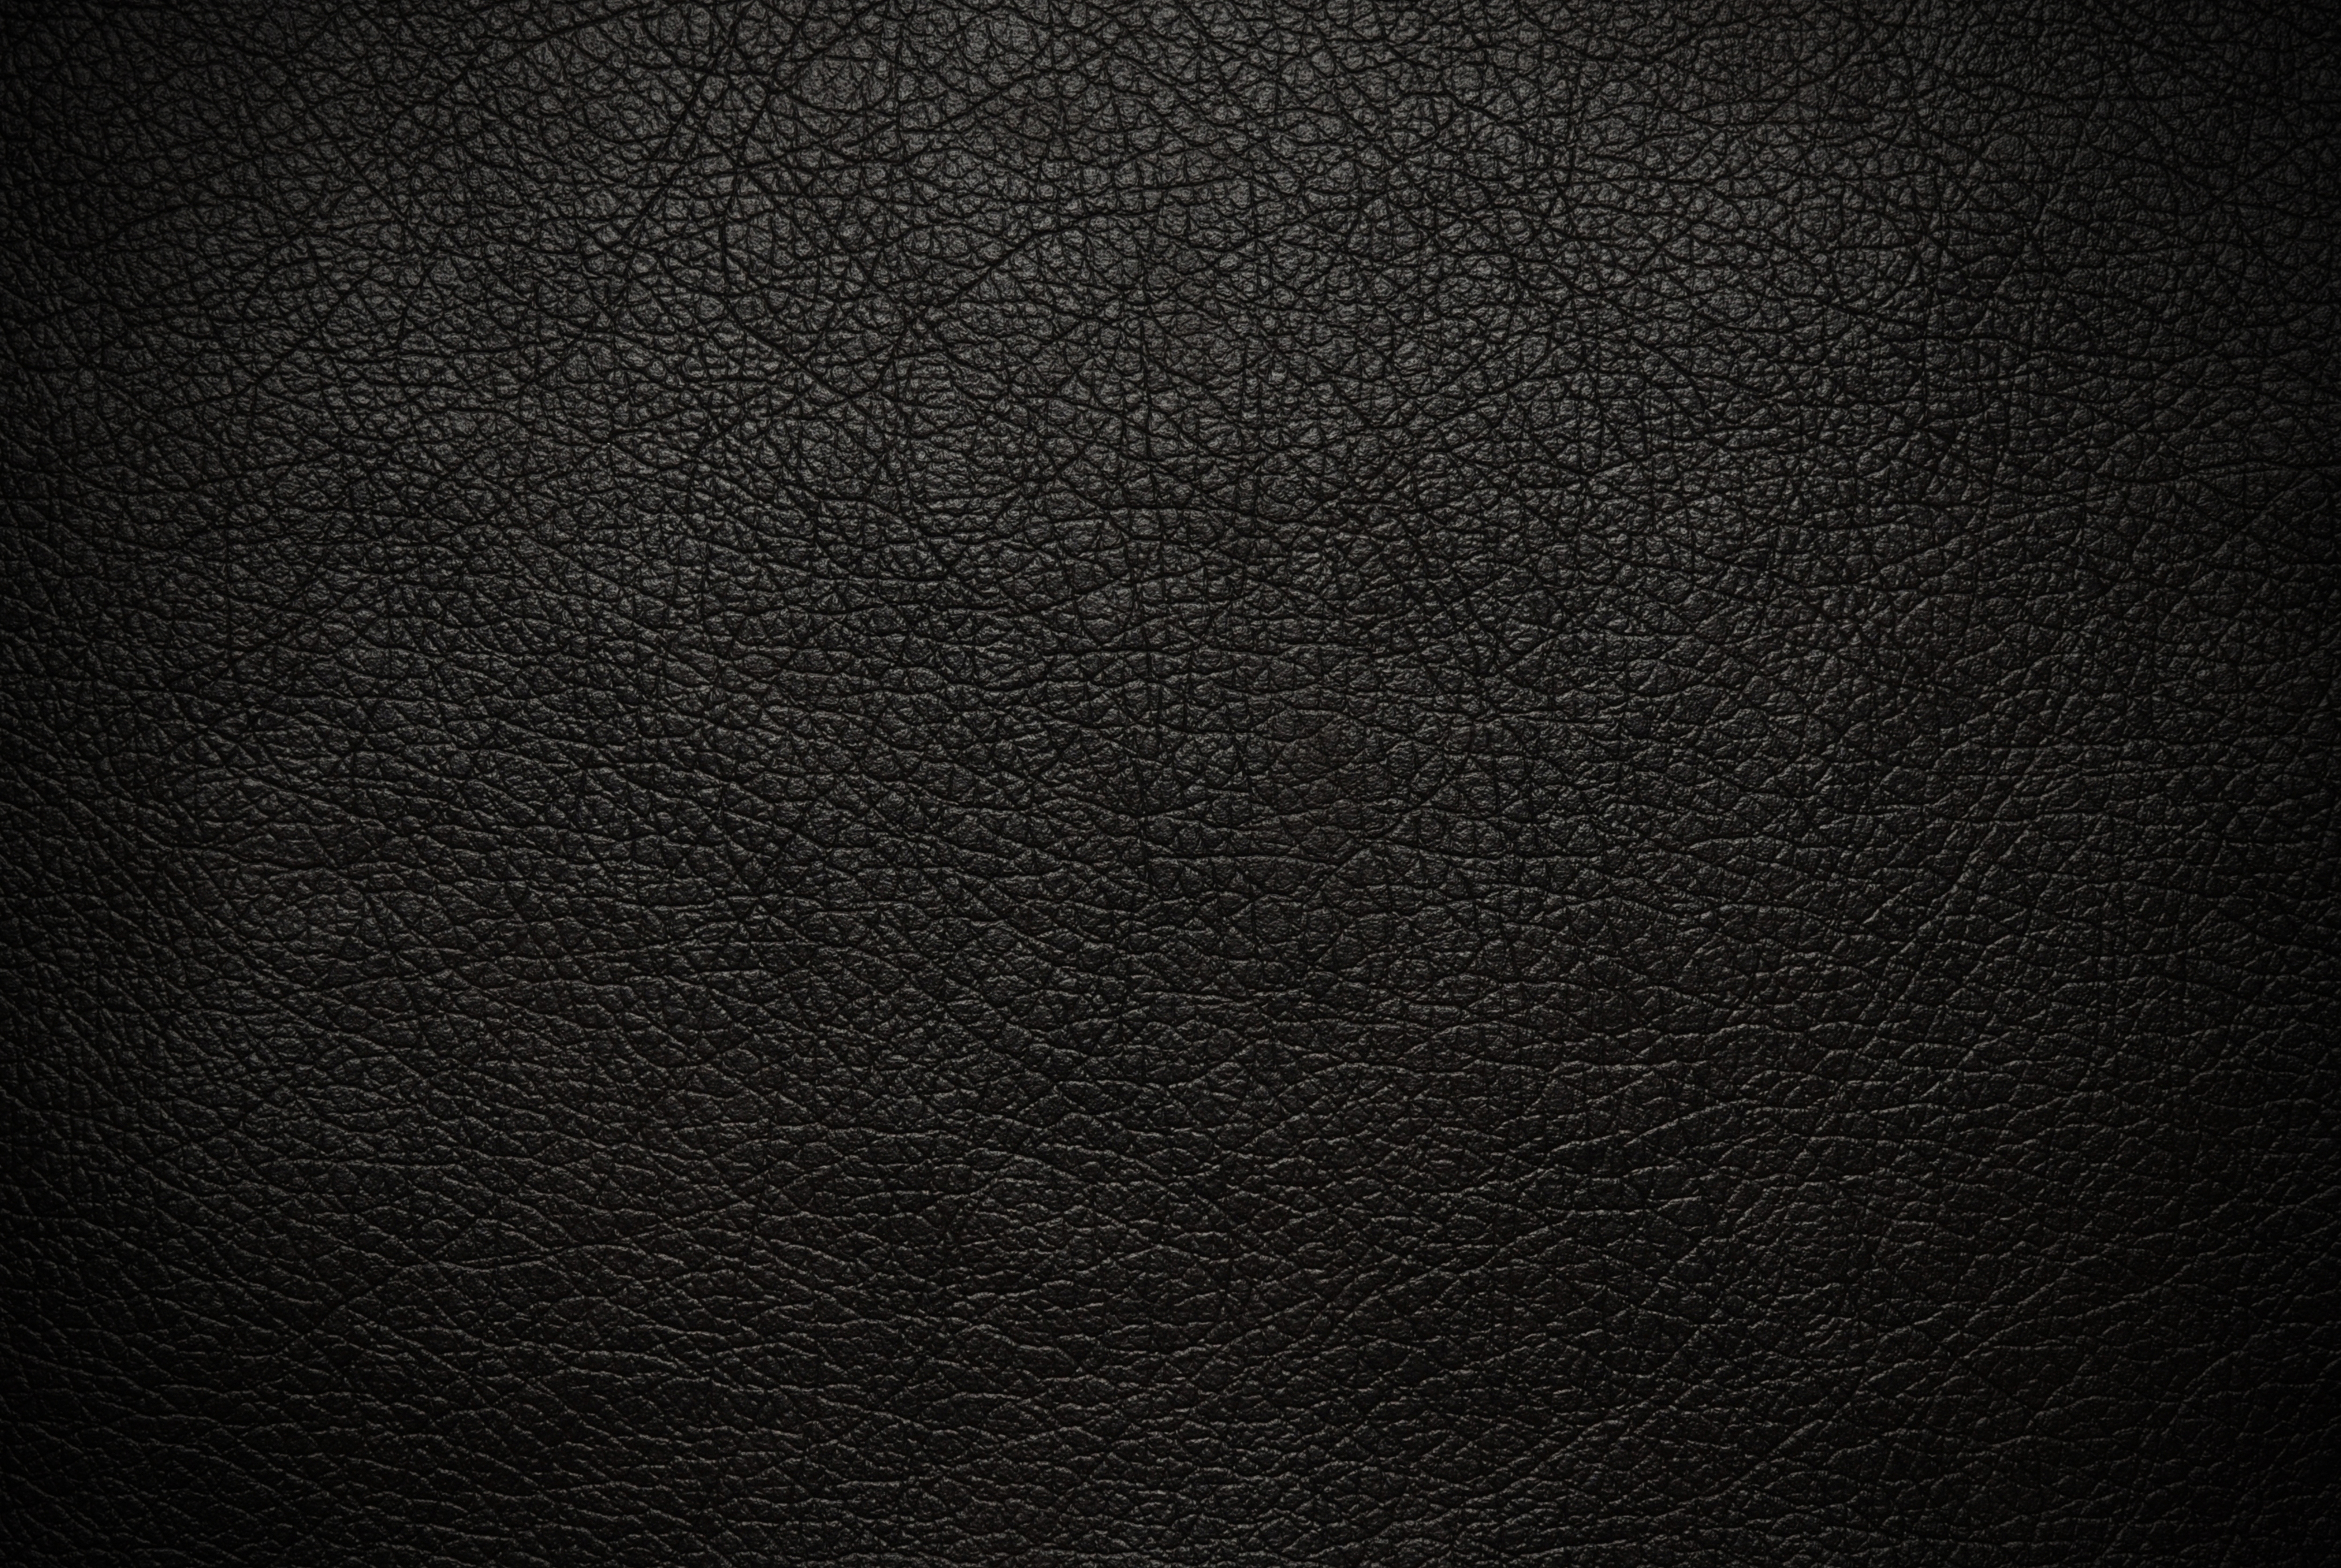 leather black cracked background texture wallpaper